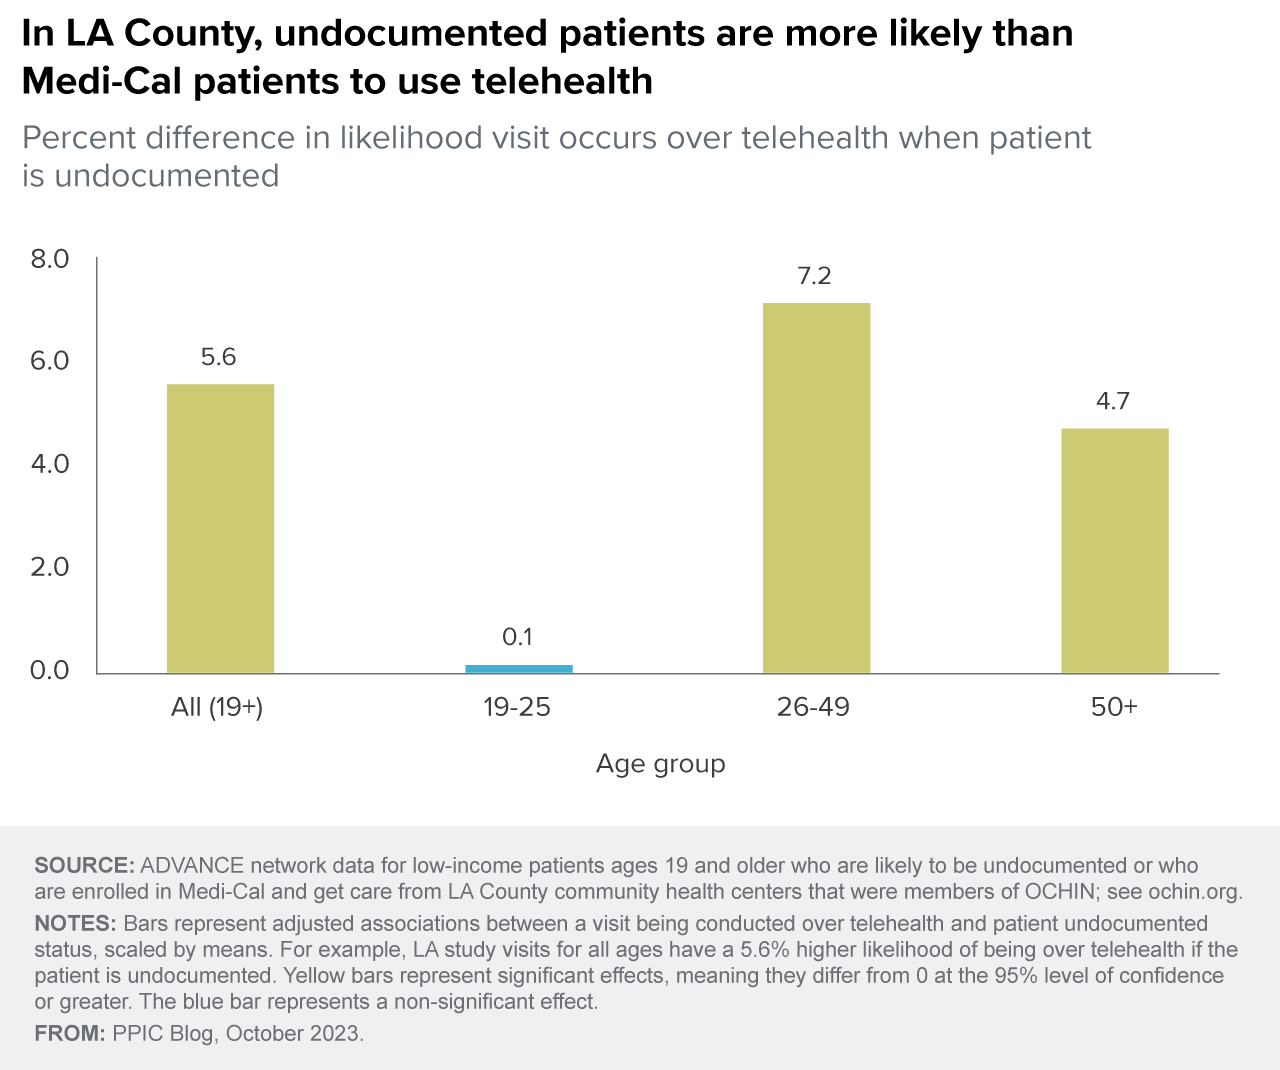 figure - In LA County, undocumented patients are more likely than Medi-Cal patients to use telehealth 